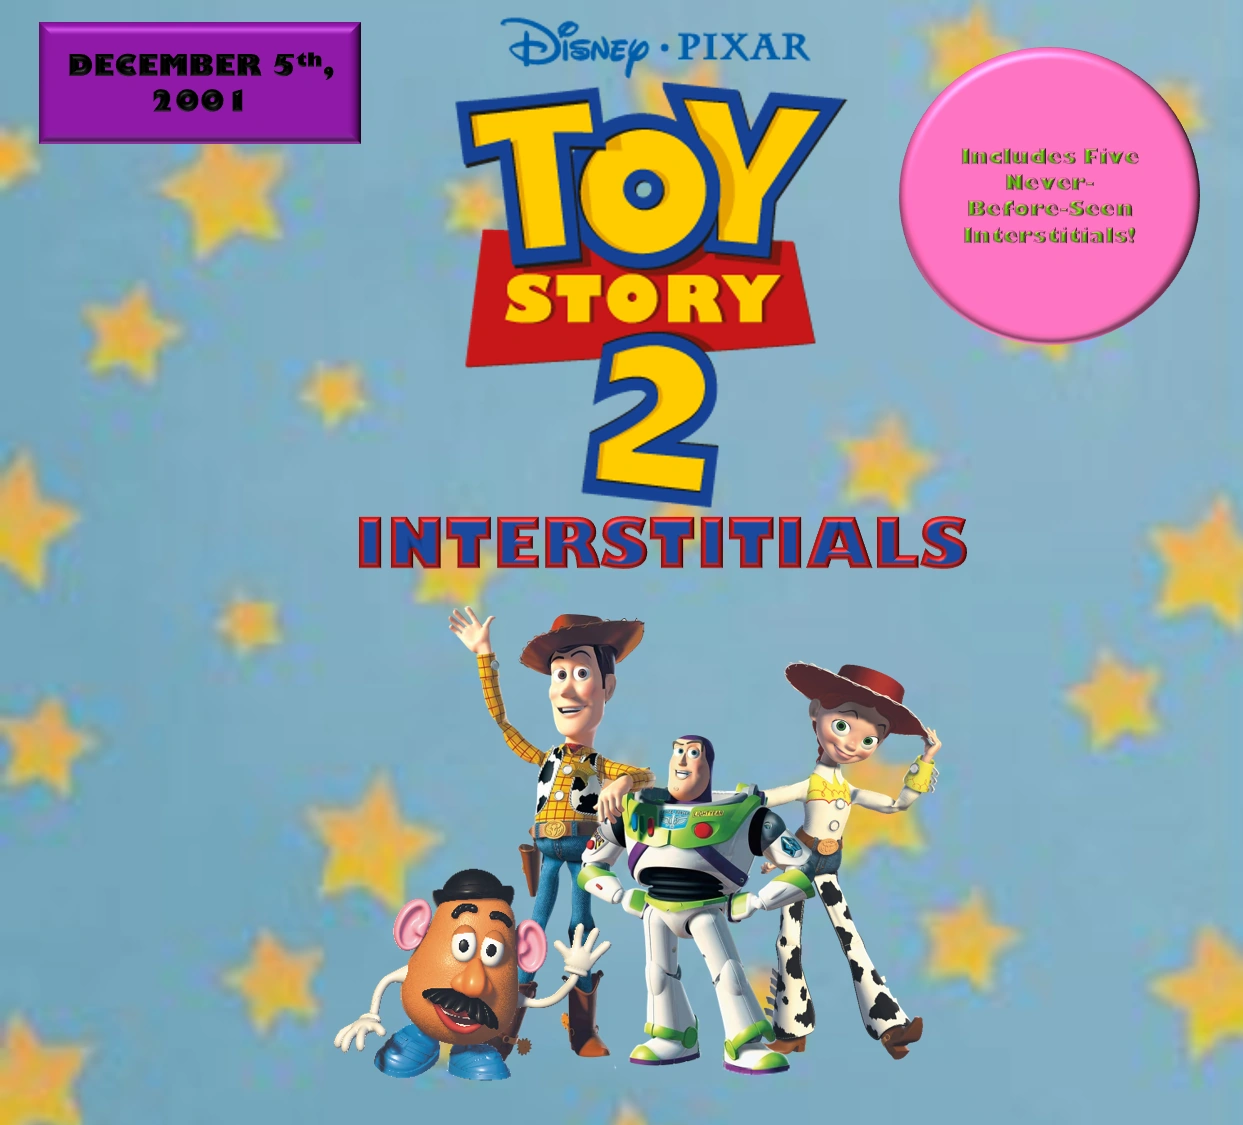 Disney Toy Story Pin - Toy Story 3 - DVD Release